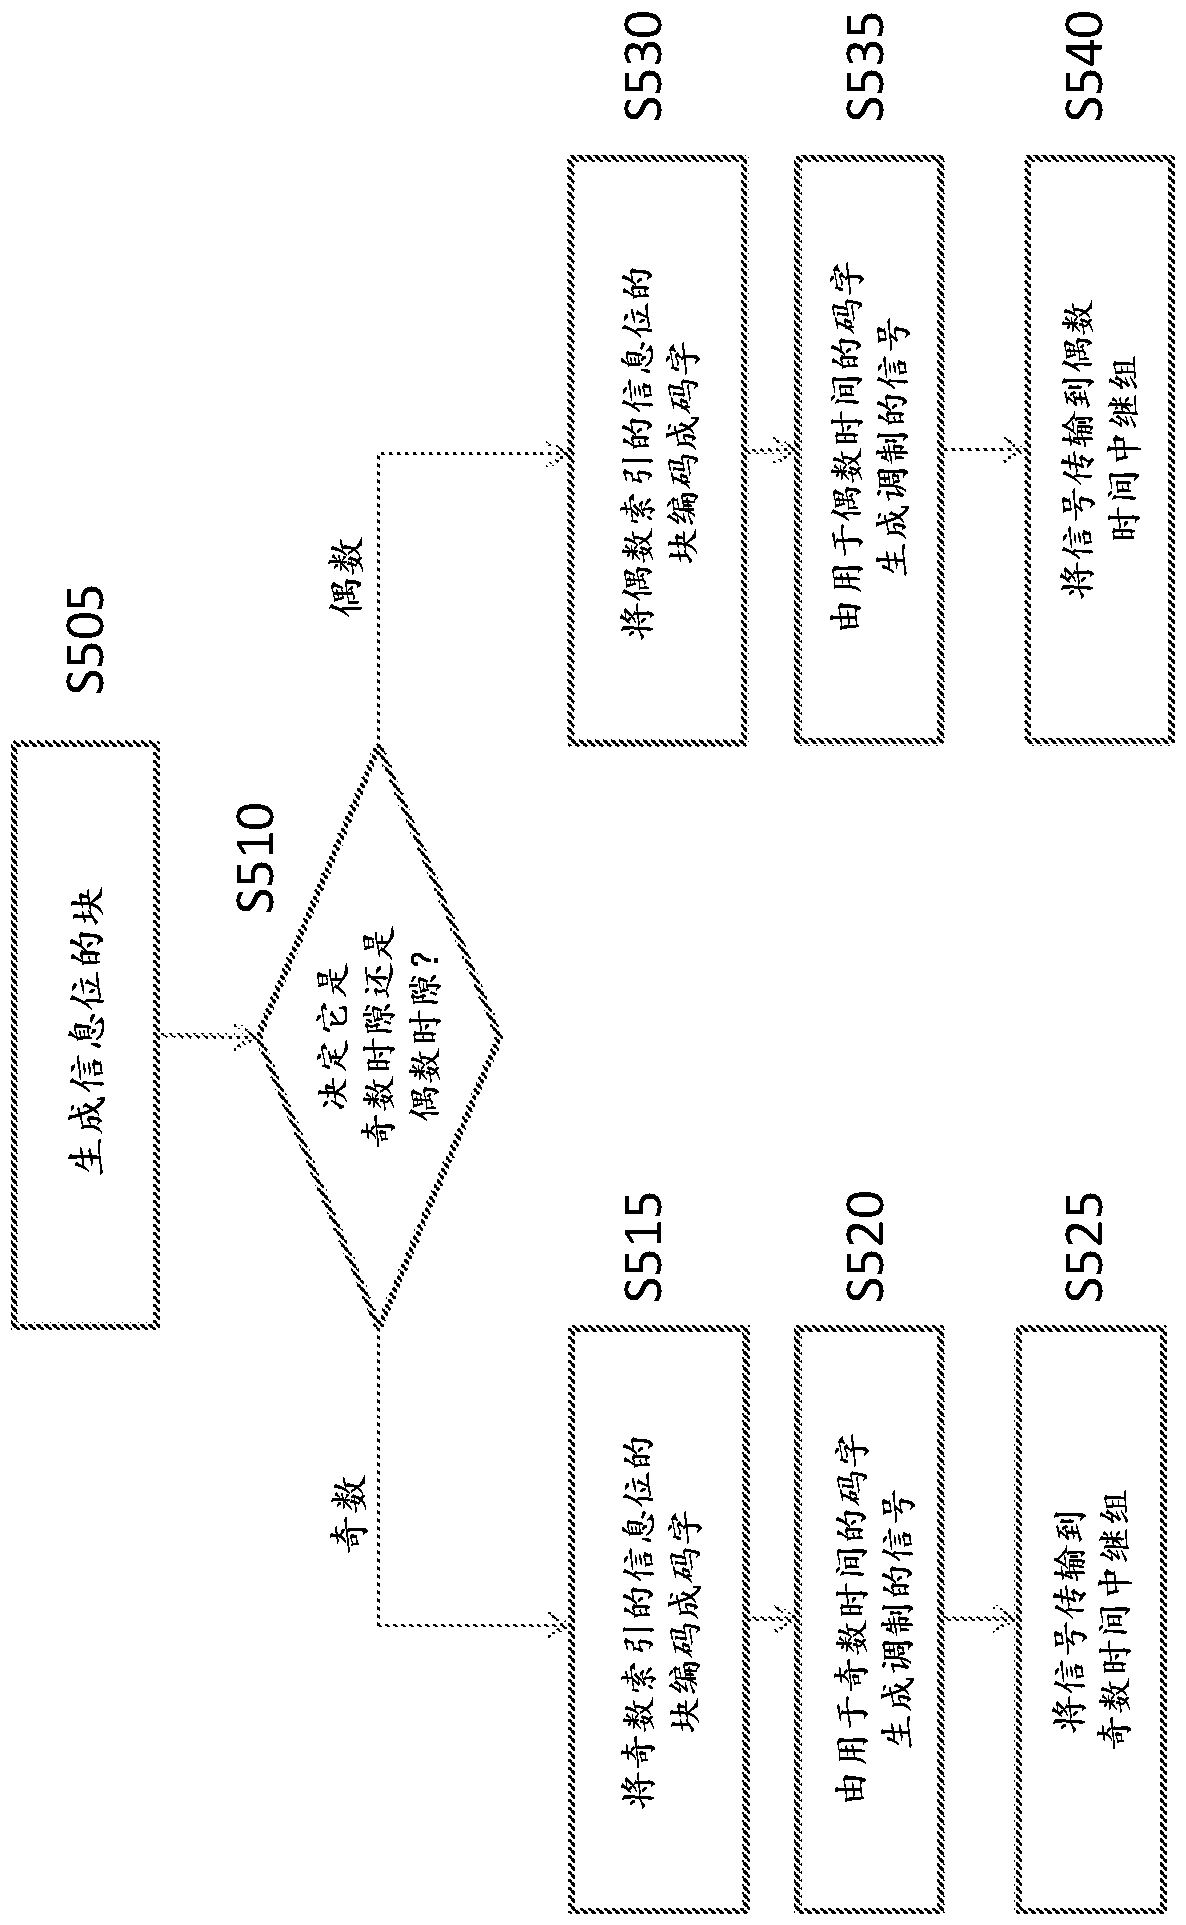 Adaptive relay schemes and virtual full-duplex relay operation